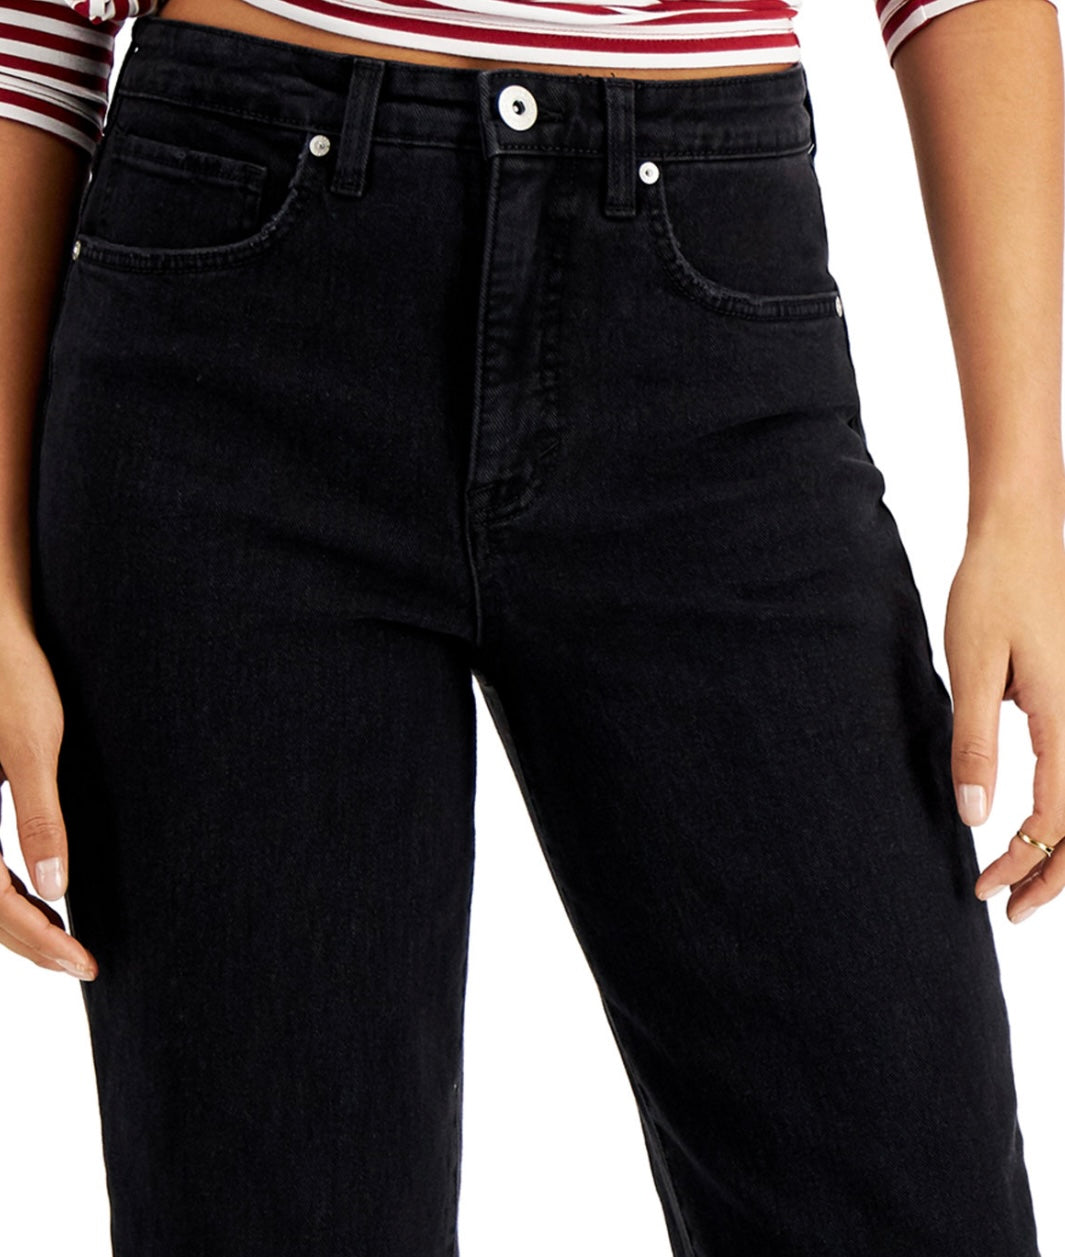 Style & Co. Women's Highrise Vintage Straight Mom Jean Washed Black